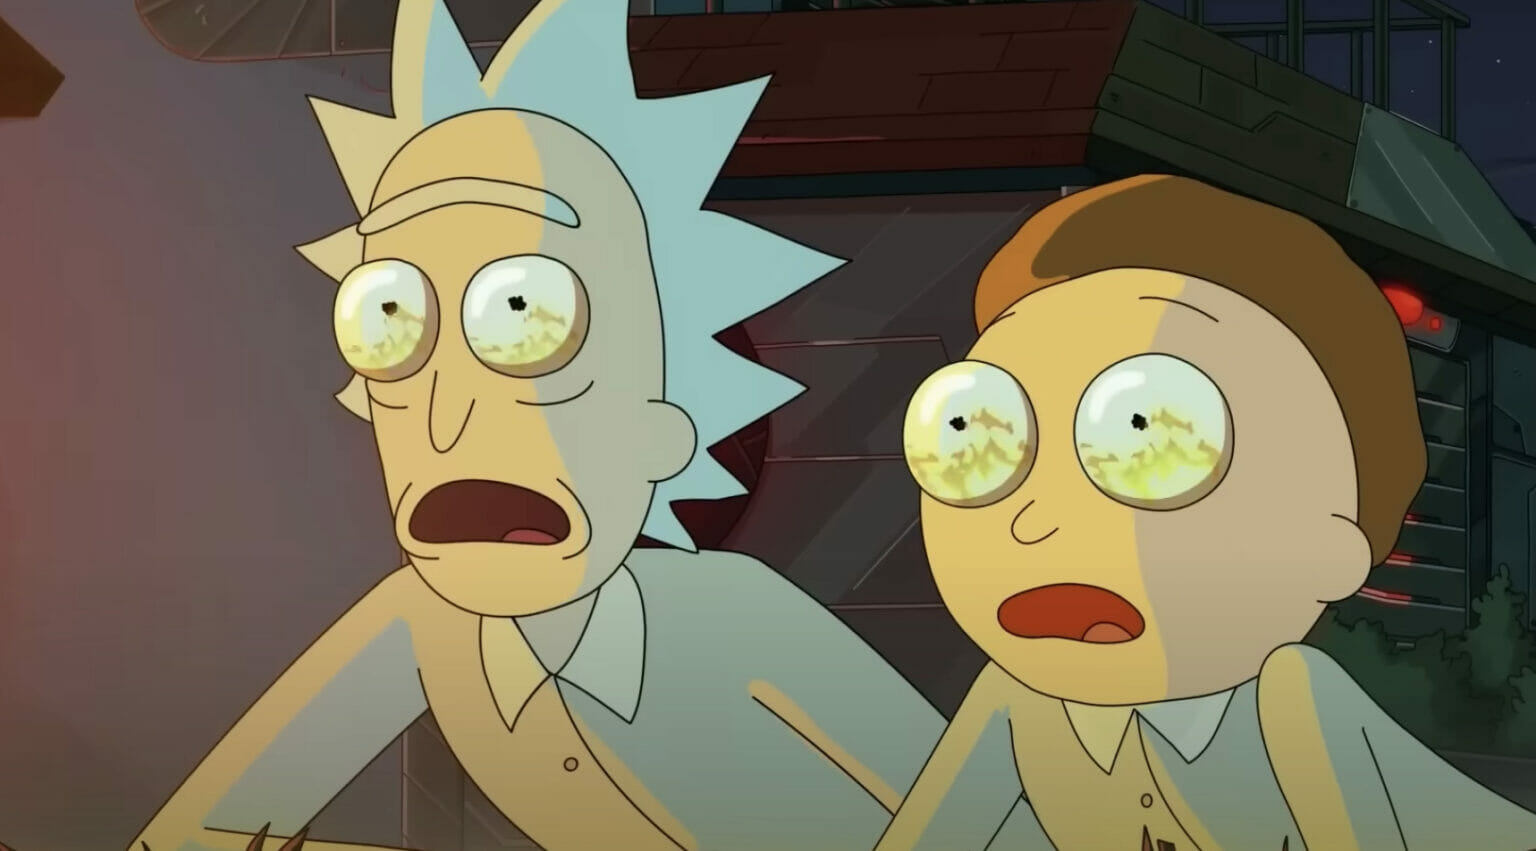 Skip or Stream? Rick and Morty's 